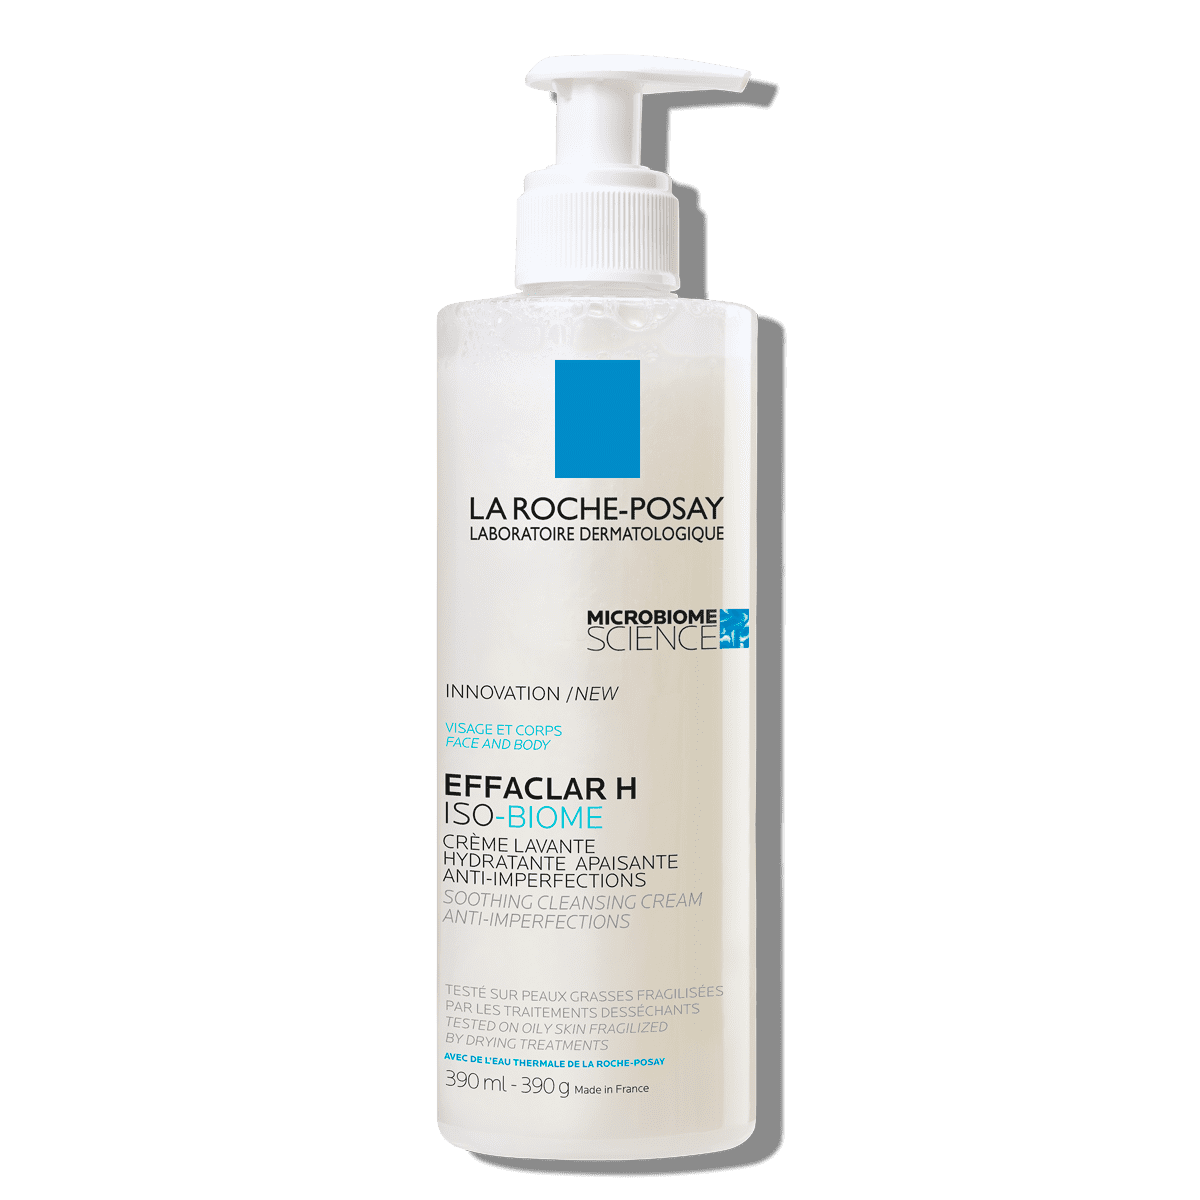 lrp_effaclar_h isobiome-cleanser-390ml pack front